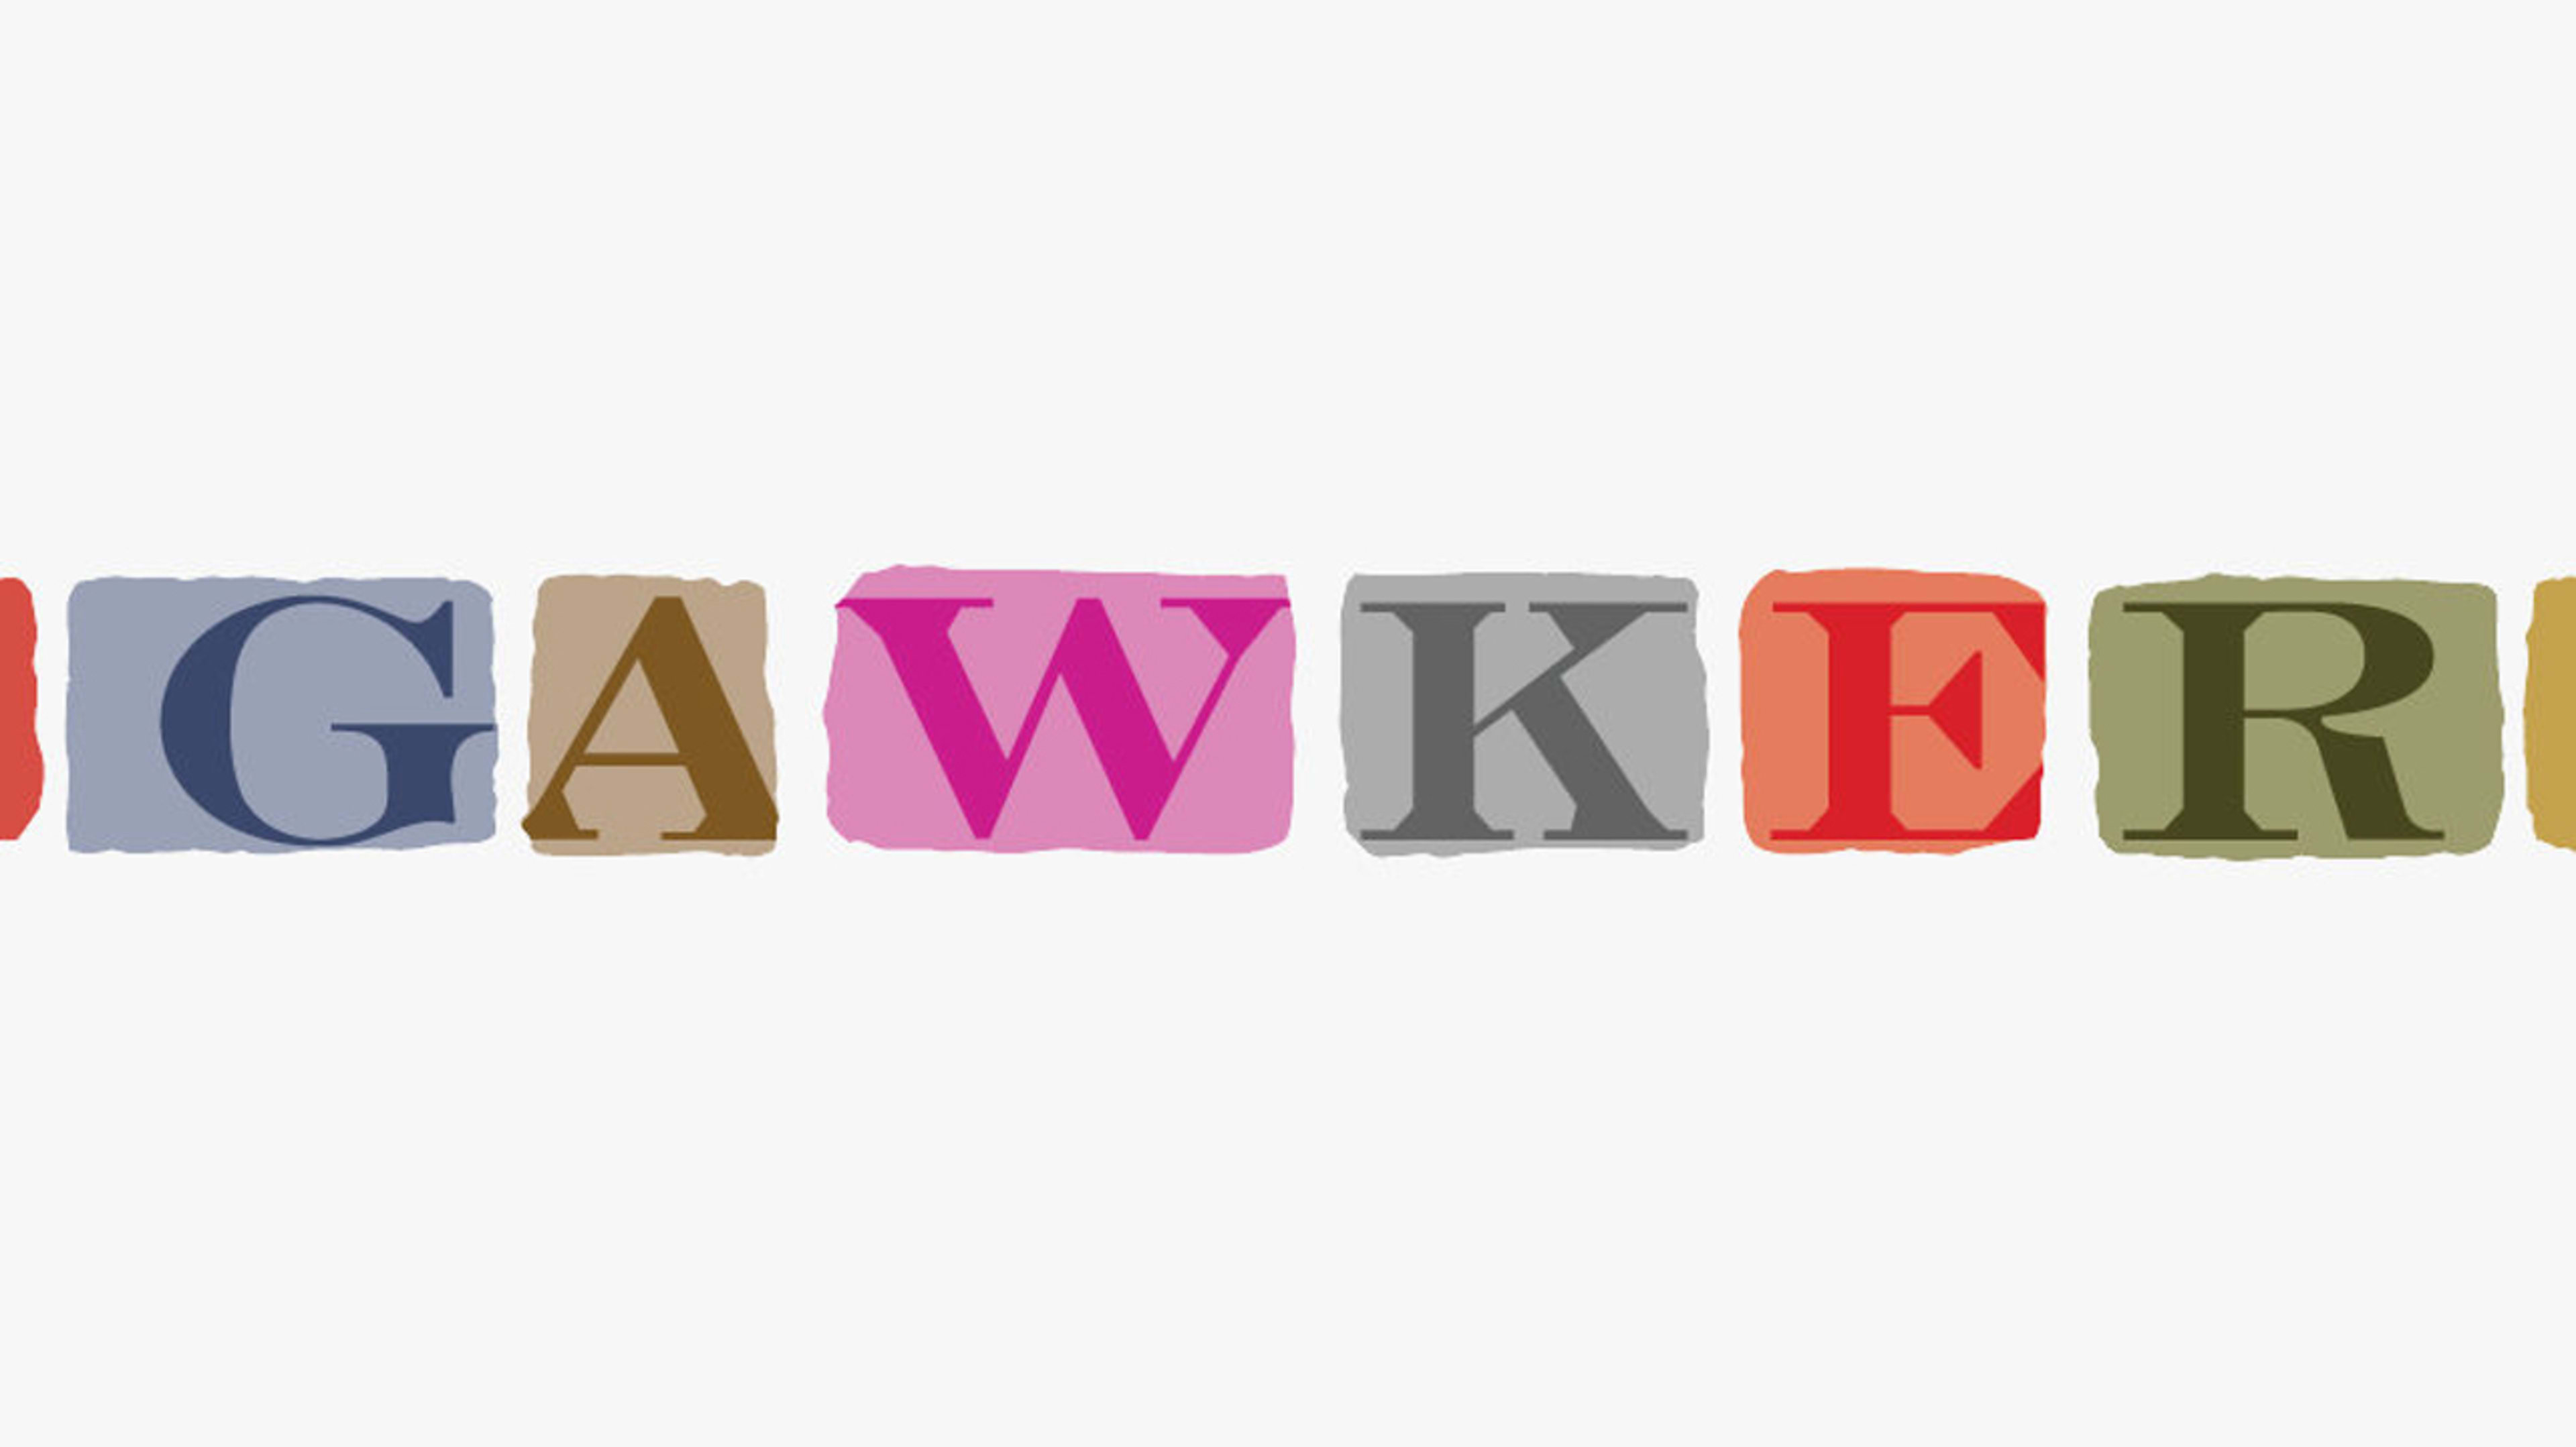 The Gawker Foundation’s Kickstarter campaign has officially failed